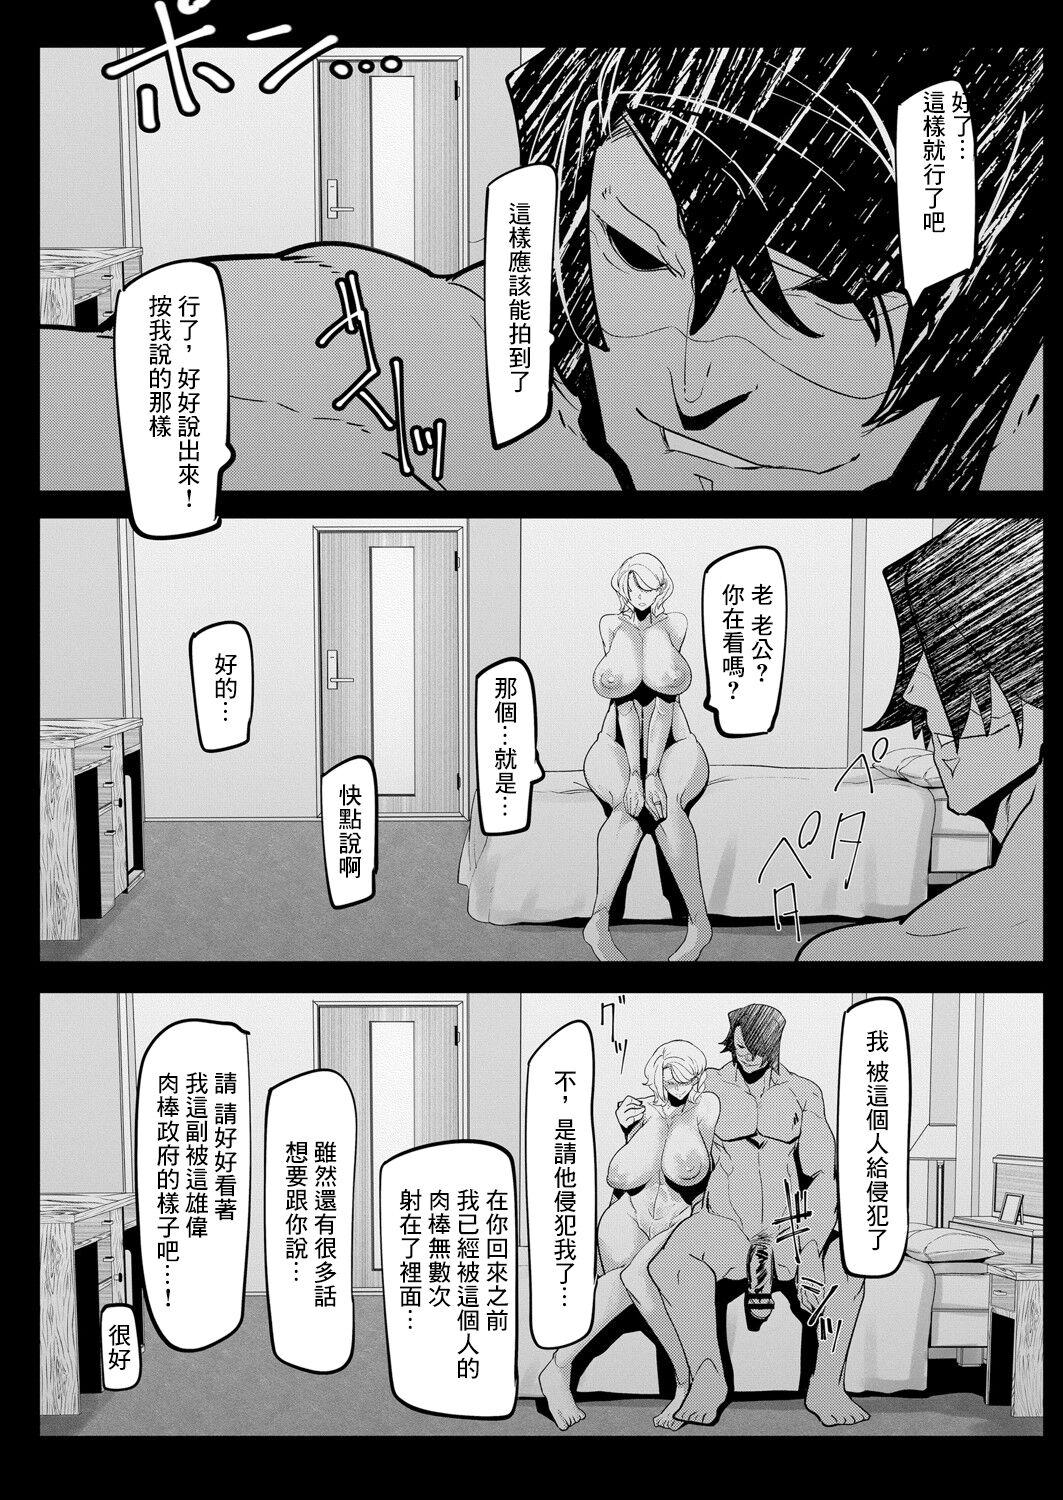 HERO DAY TIME Ch. 2 17